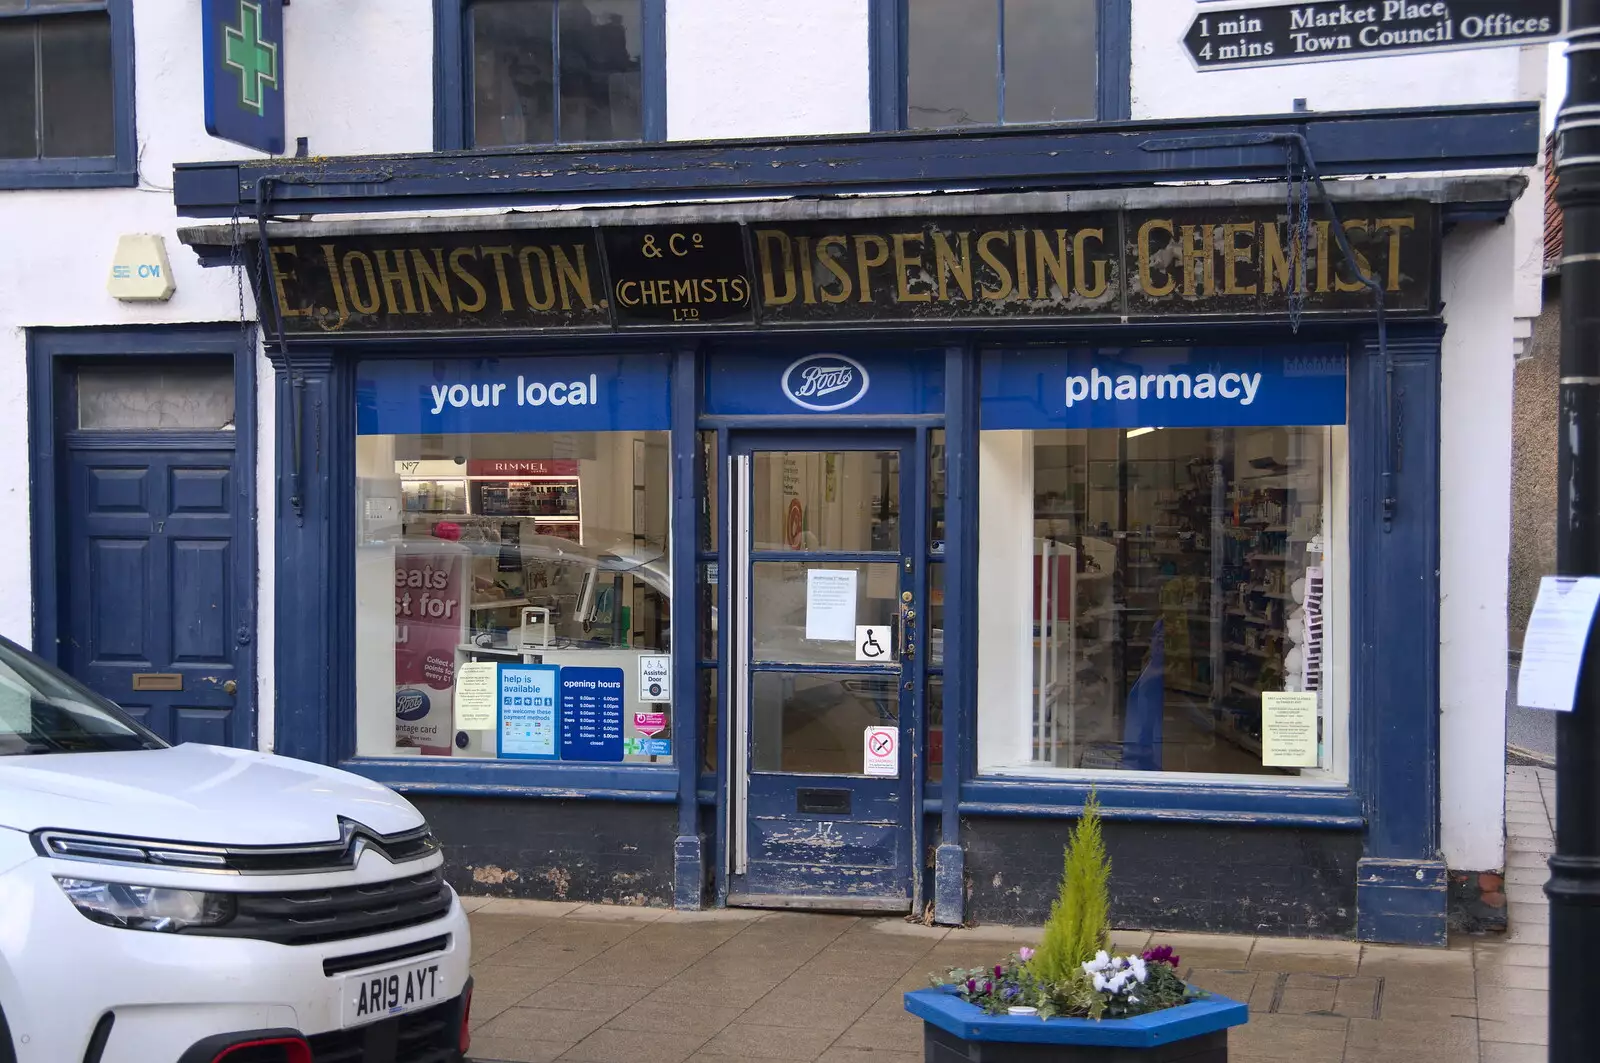 An E. Johnston Dispensing Chemist sign on a Boots, from Lunch in Harleston, Norfolk - 1st March 2023